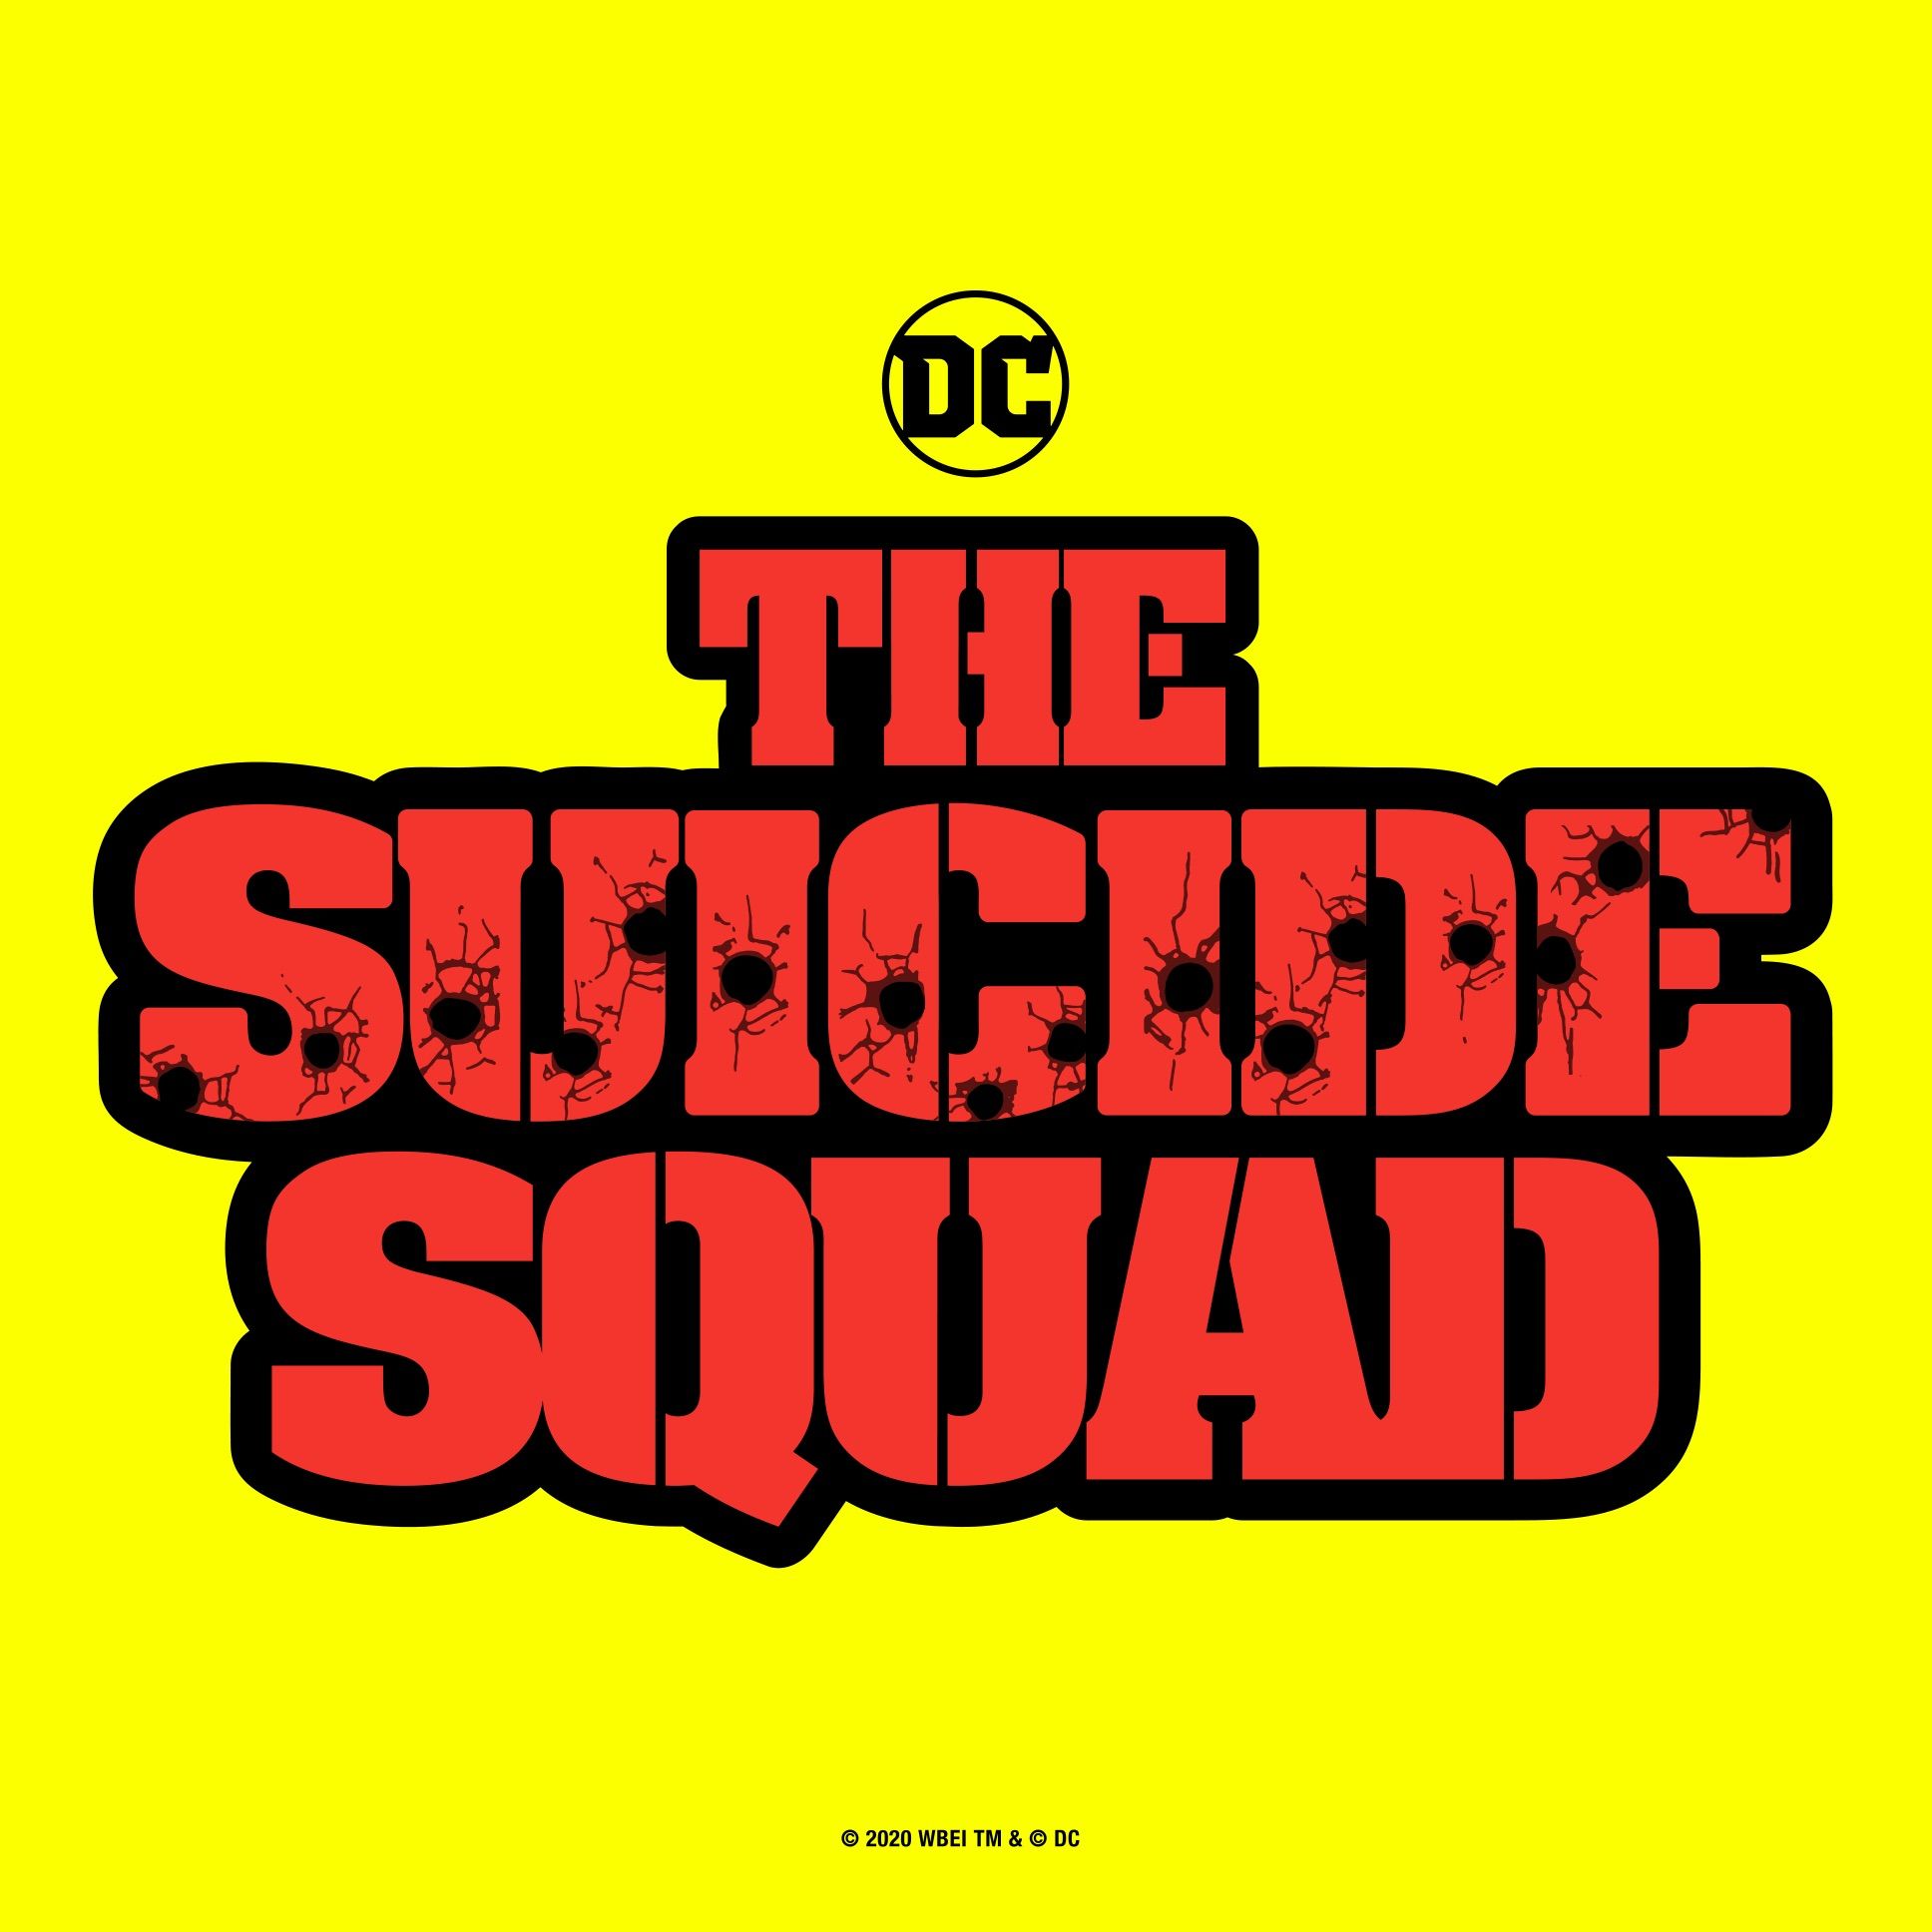 The Suicide Squad' Most Watched DC Film On HBO Max – Deadline